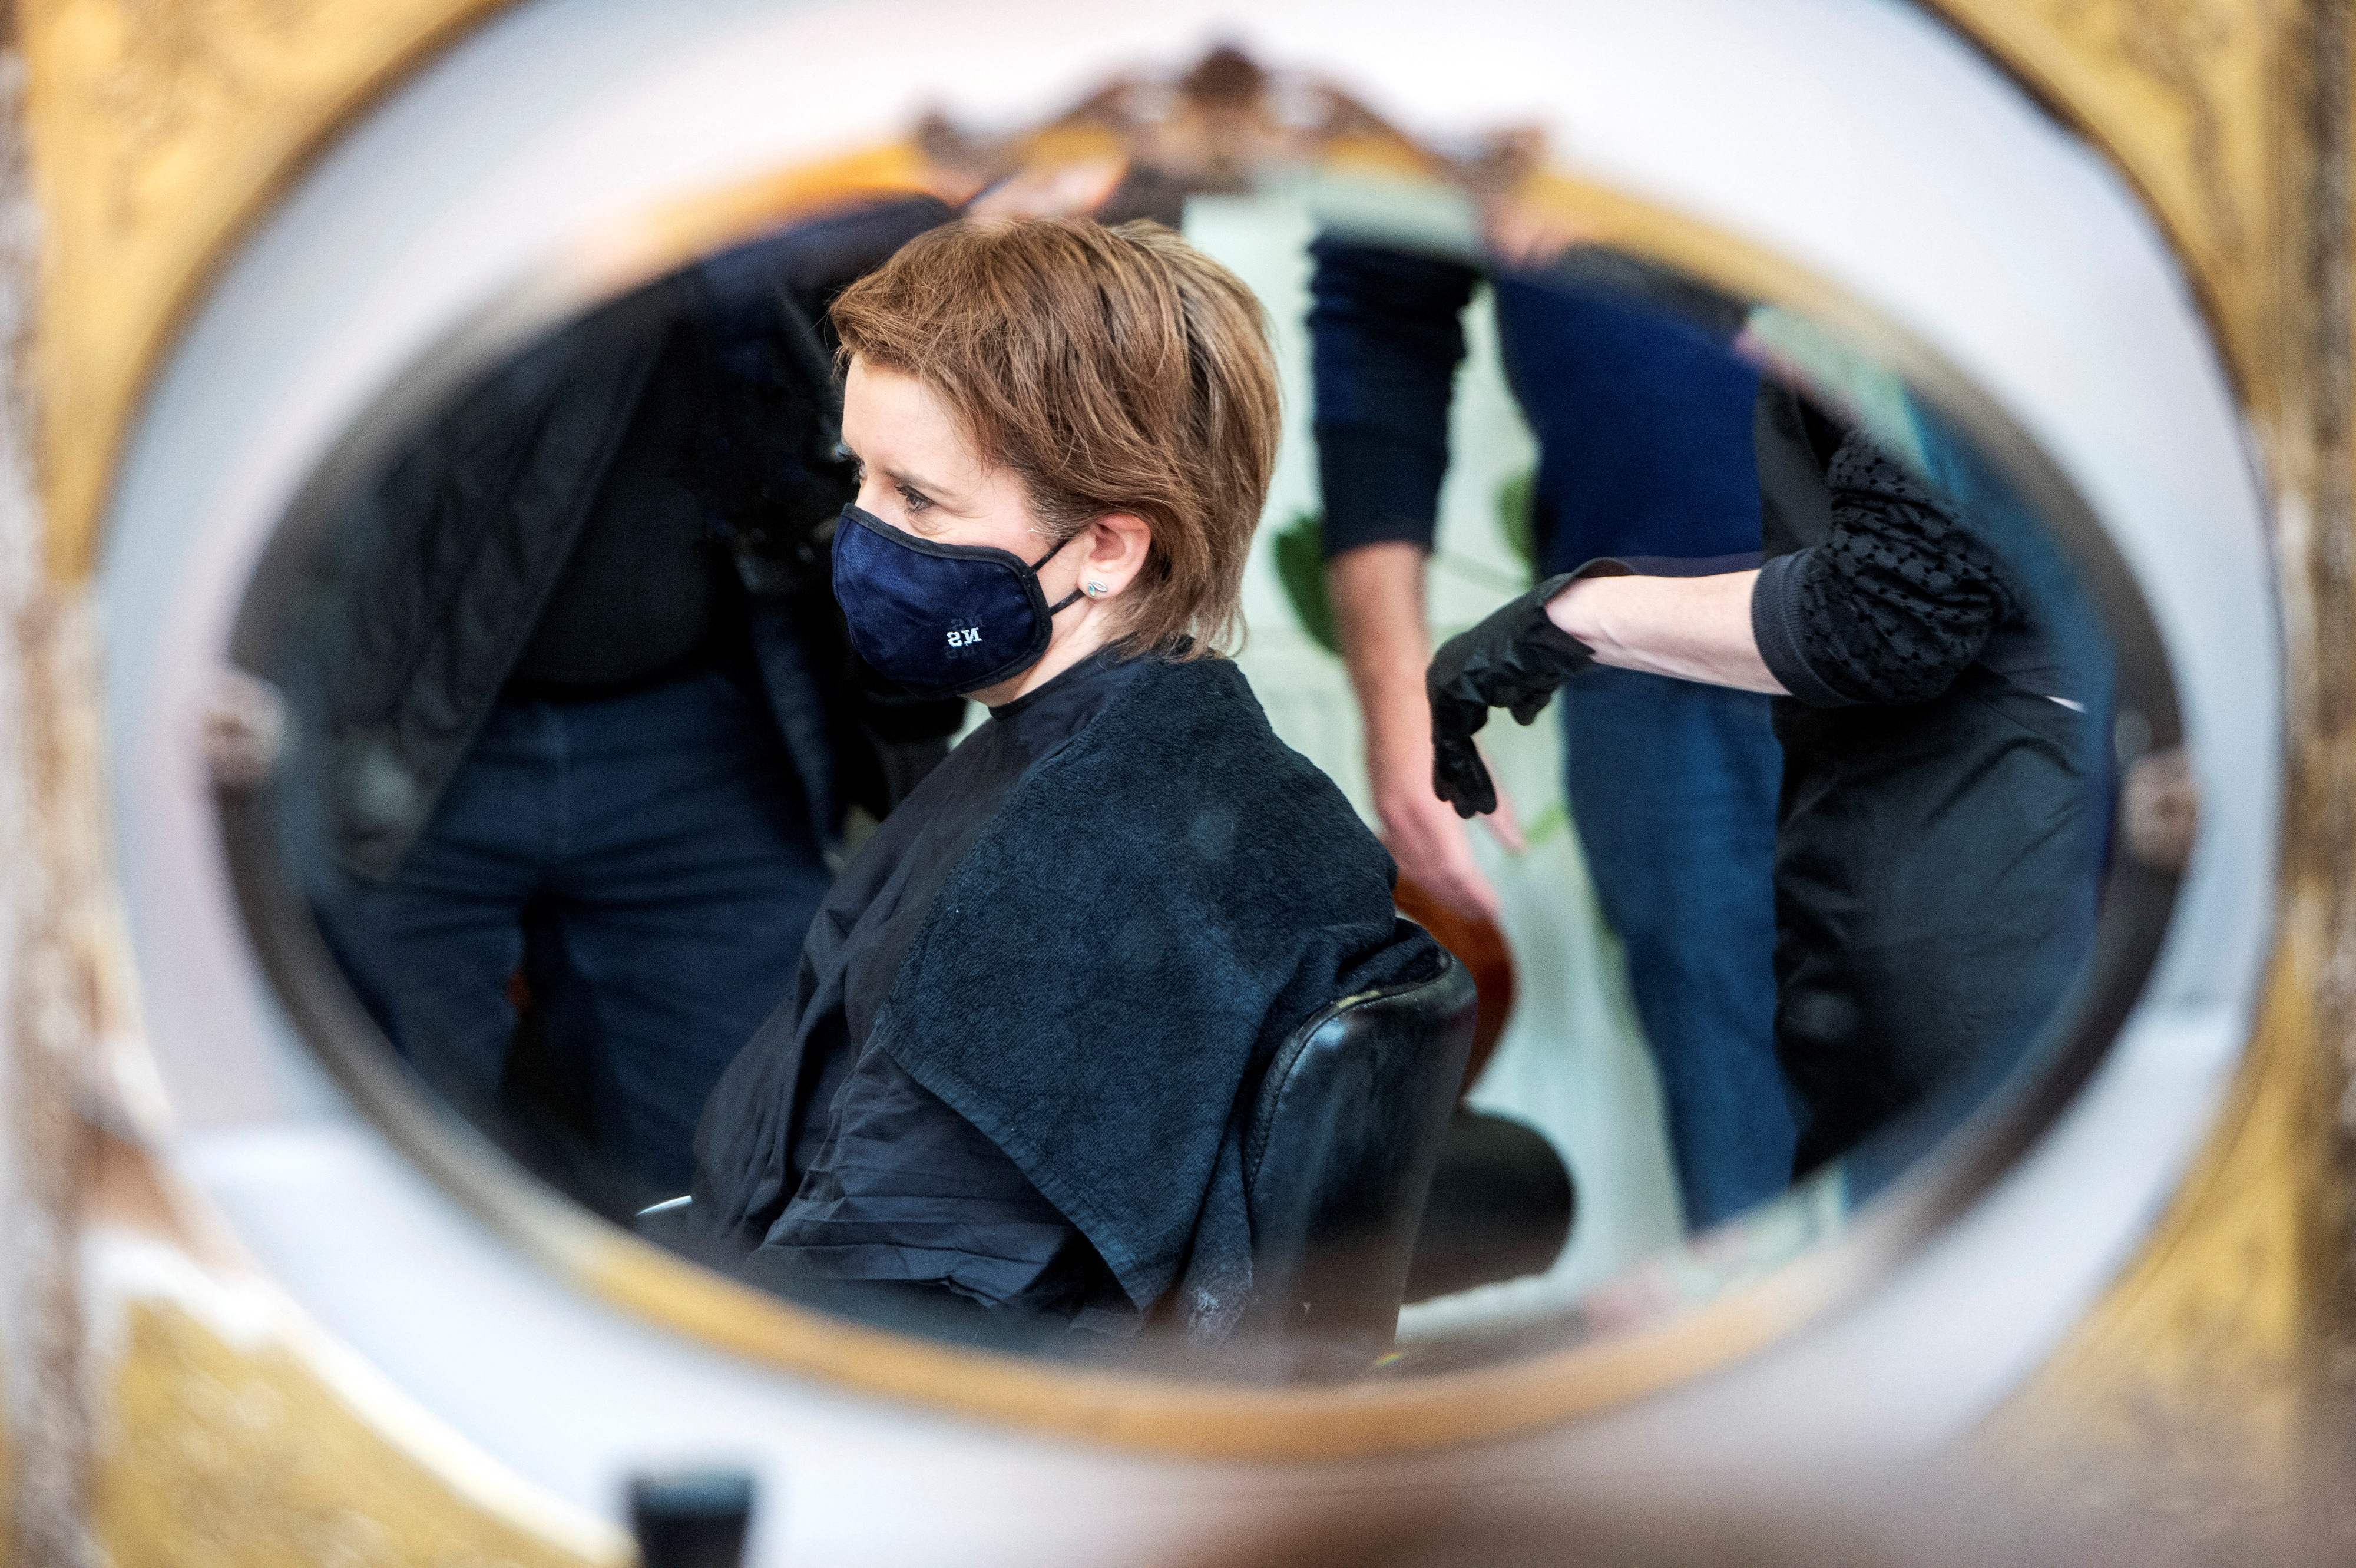 Nicola Sturgeon gets her hair cut in preparation for campaigning